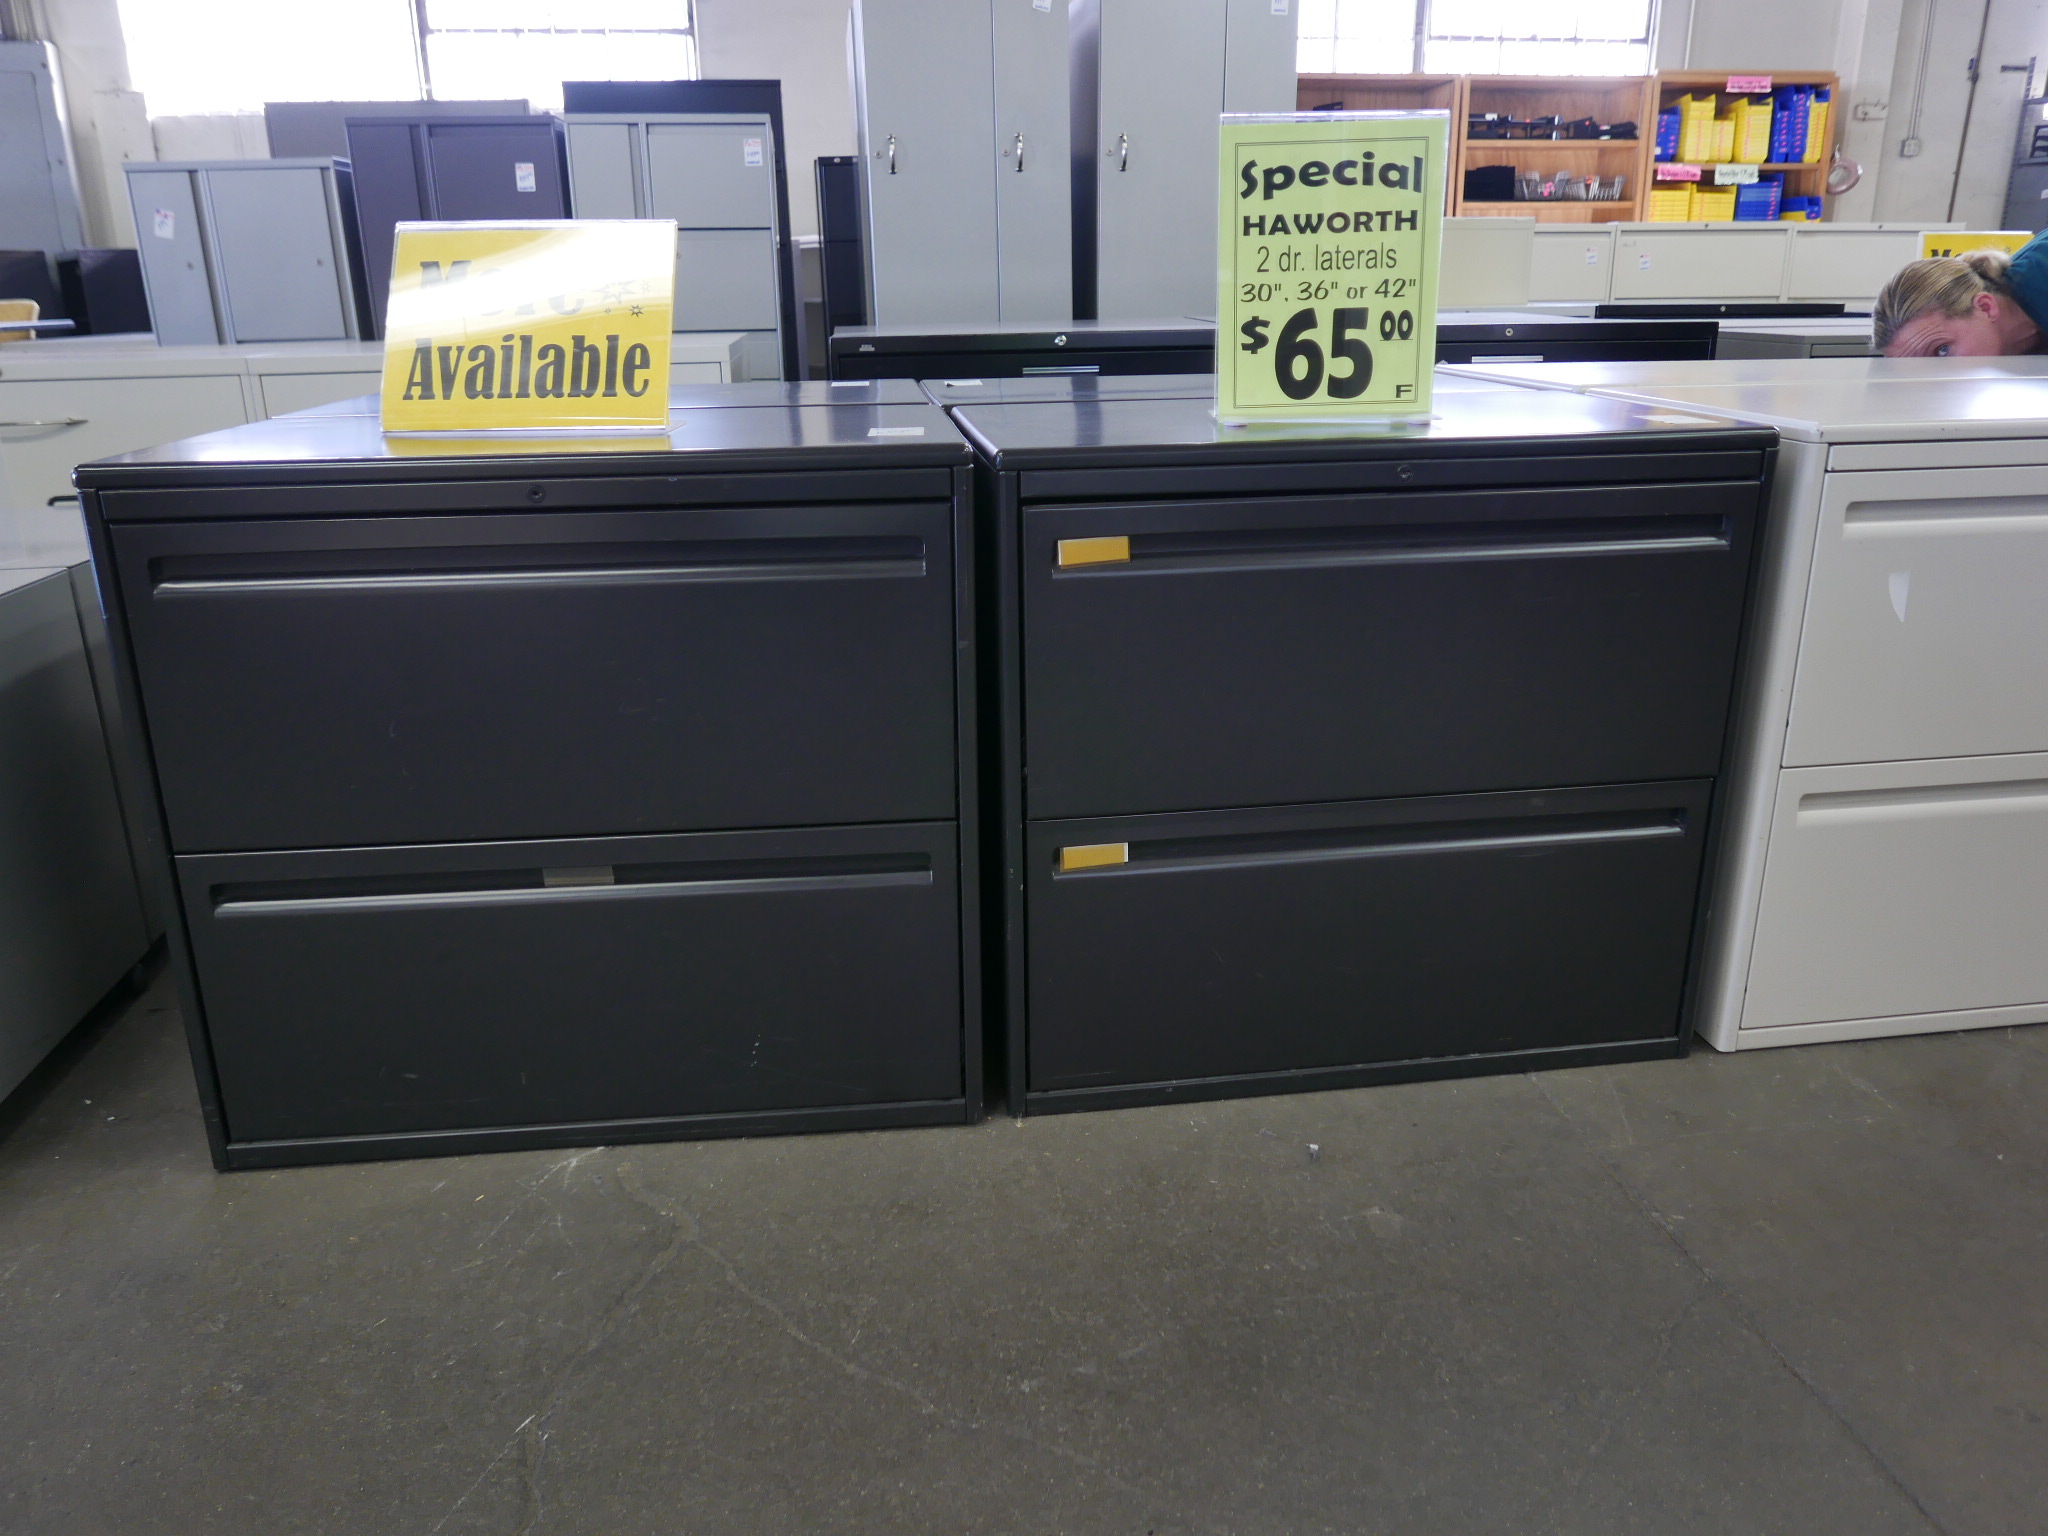 2 Drawer Haworth Lateral Files On Sale 65 00 Tr Trading Company